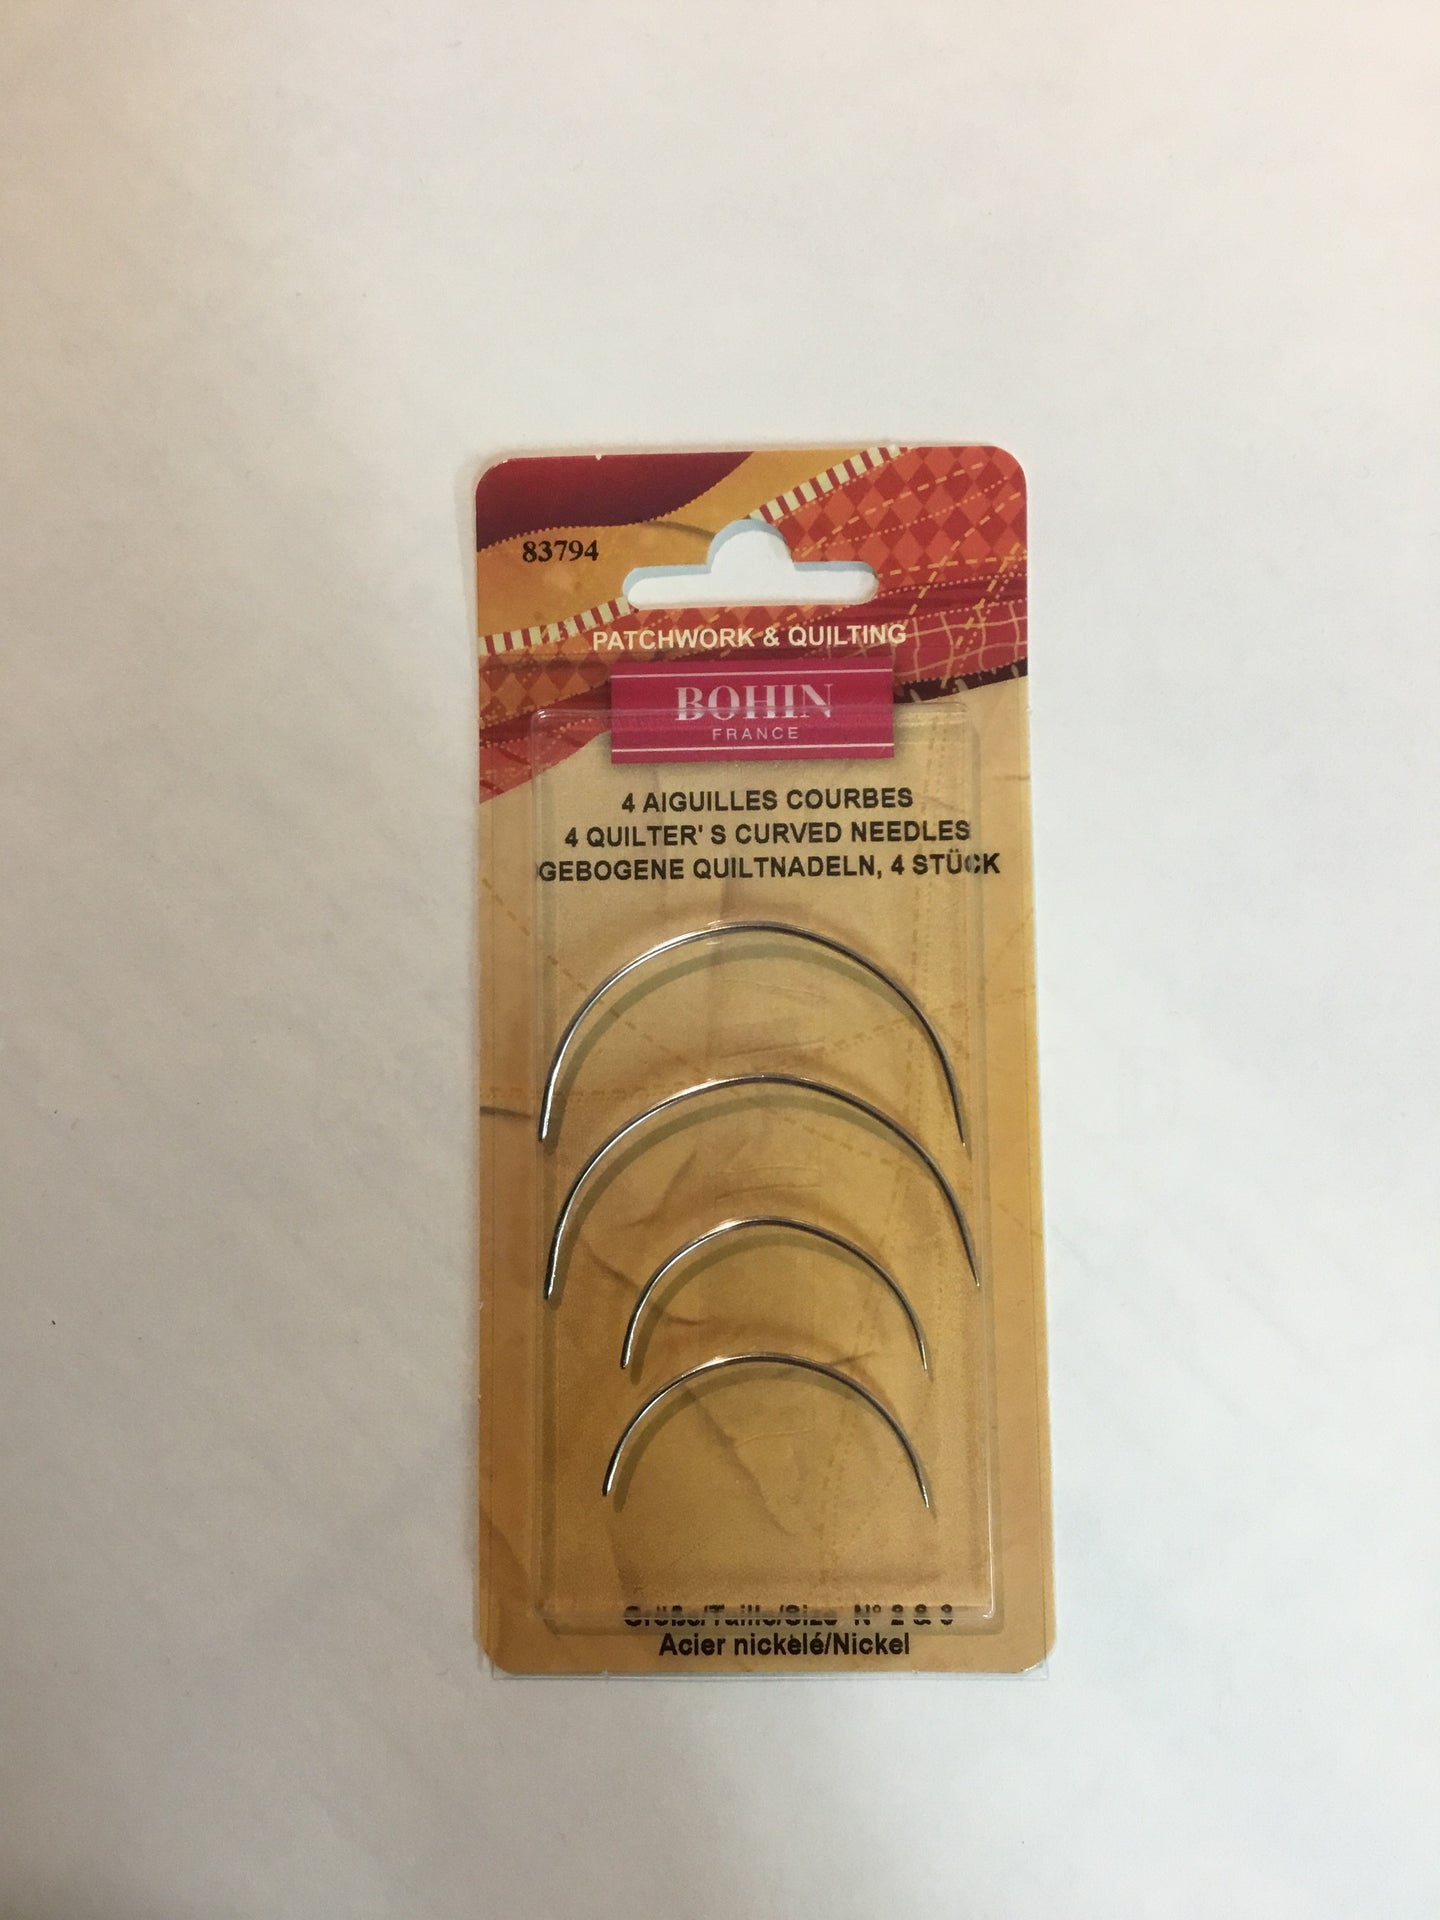 Bohin quilter’s curved needles